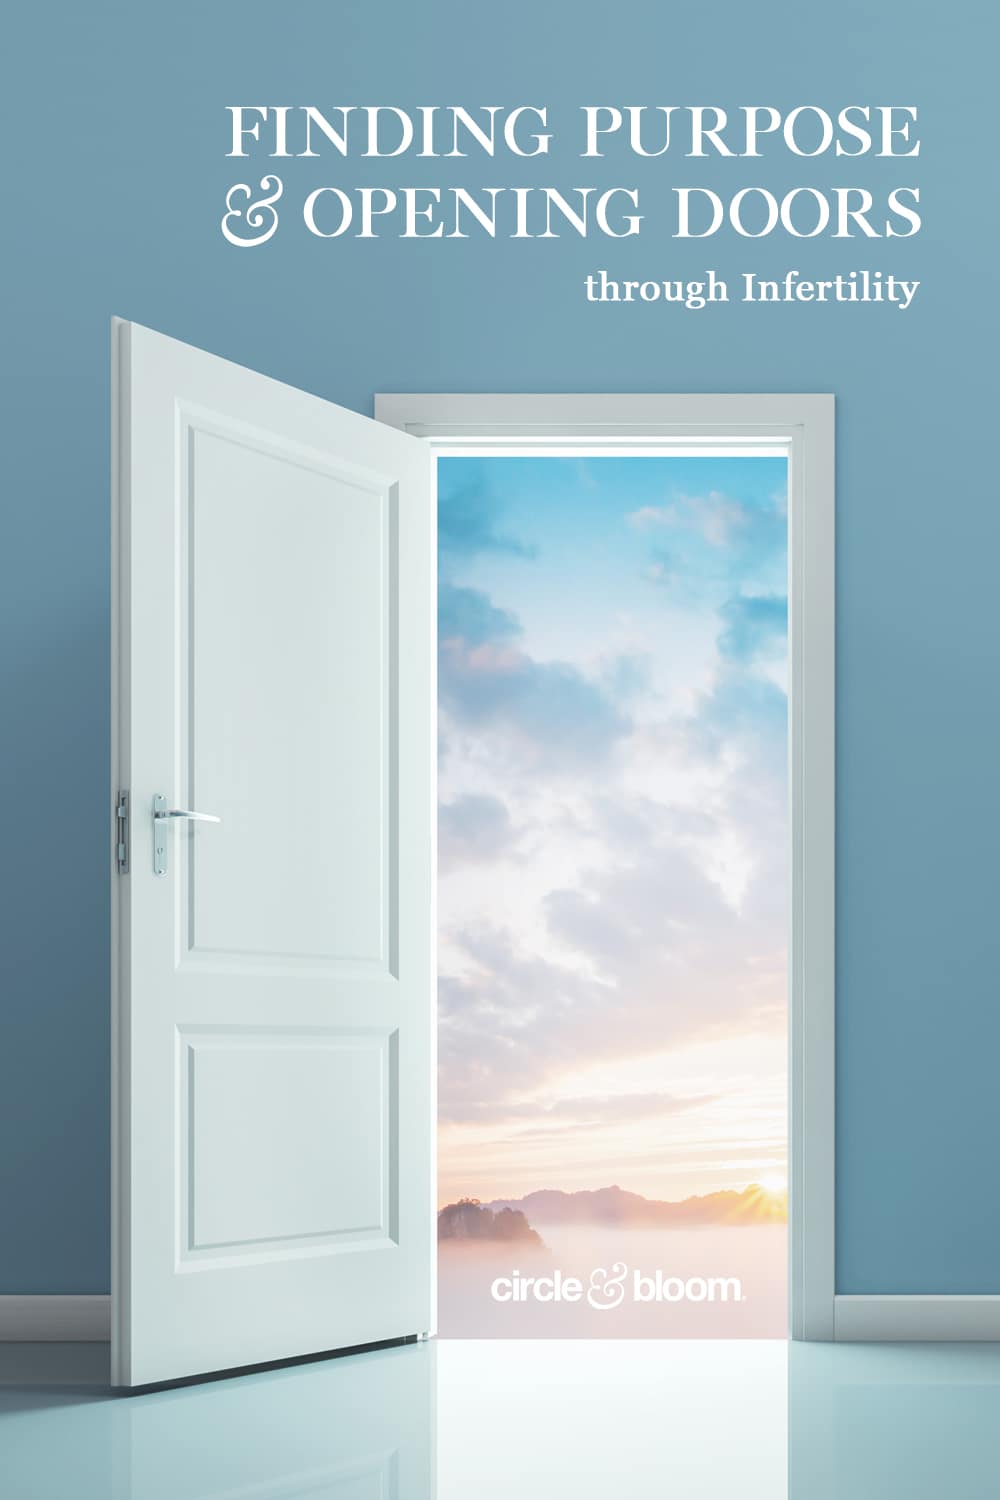 Finding Purpose and Opening Doors through Infertility